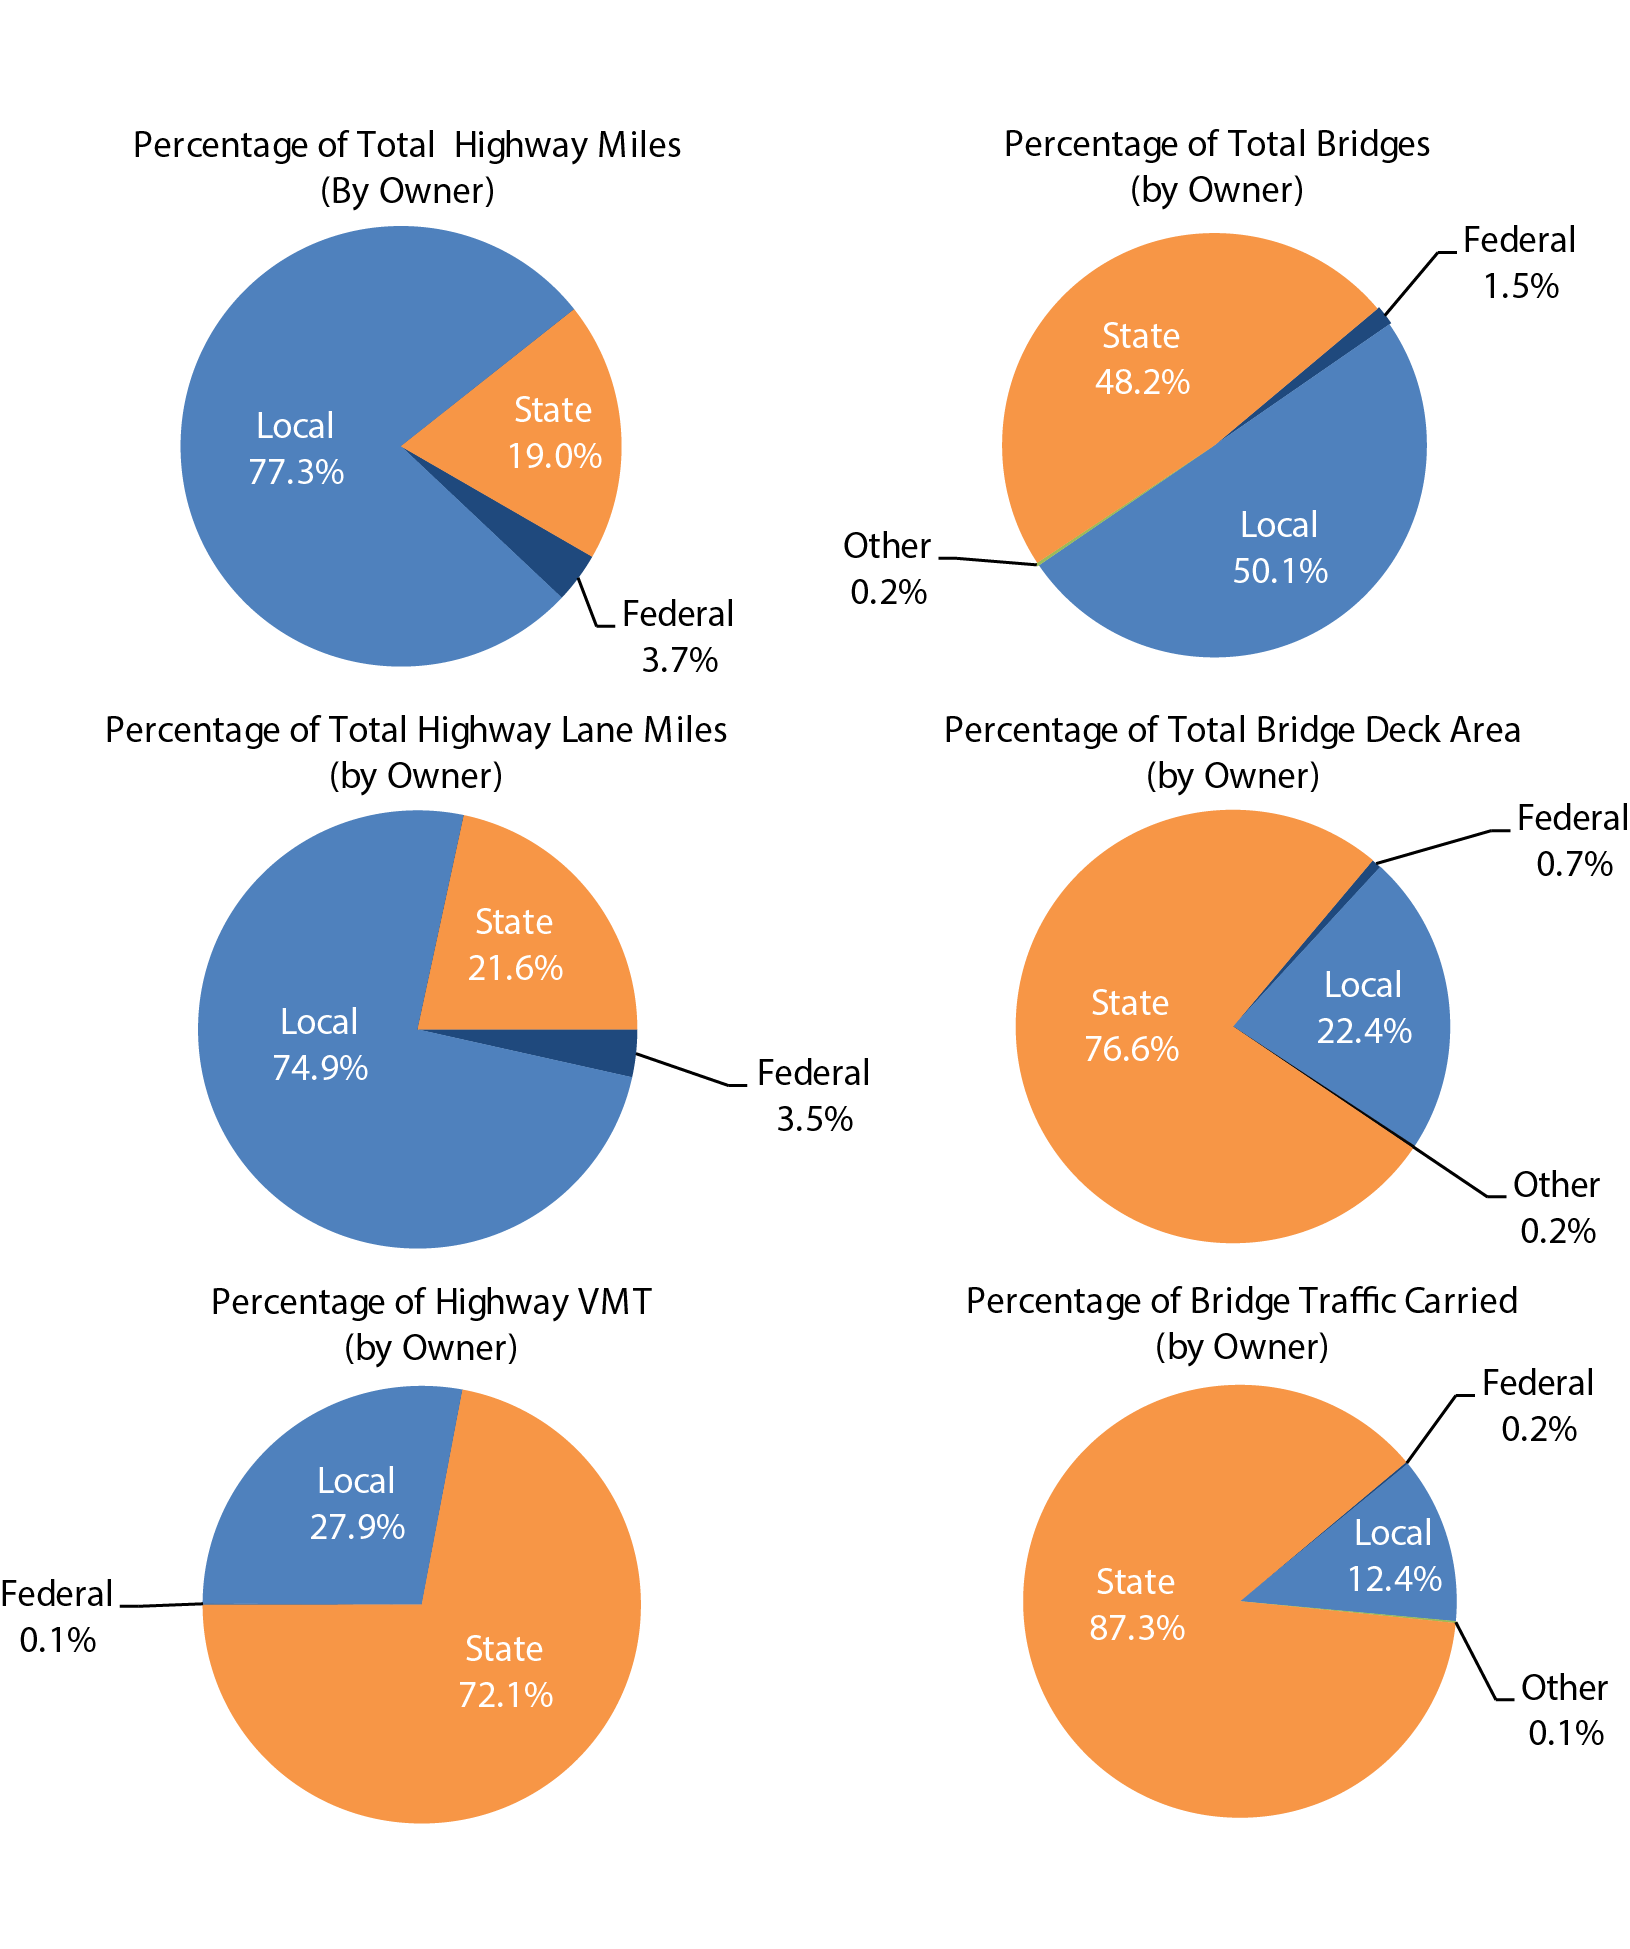 A set of six pie charts plots percentages for four categories of ownership of highways and bridges. The six pie charts show percentages of total highway miles, total highway lane miles, highway VMT, total bridges, total bridge deck area, and bridge traffic carried. Under total highway miles, Federal accounts for 3.7 percent , State accounts for 19.0 percent , and local accounts for 77.3 percent . Under total highway lane miles, Federal accounts for 3.5 percent , State accounts for 21.6 percent , and local accounts for 74.9 percent . Under highway VMT, Federal accounts for 0.1 percent , State accounts for 72.1 percent , and local accounts for 27.9 percent . Under total bridges, Federal accounts for 1.5 percent , State accounts for 48.2 percent , local accounts for 50.1 percent , and other accounts for 0.2 percent . Under total bridge deck area, Federal accounts for 0.7 percent , State accounts for 76.6 percent , local accounts for 22.4 percent , and other accounts for 0.2 percent . Under bridge traffic carried, Federal accounts for 0.2 percent , State accounts for 87.3 percent , local accounts for 12.4 percent , and other accounts for 0.1 percent . Sources: Highway Performance Monitoring System; National Bridge Inventory.